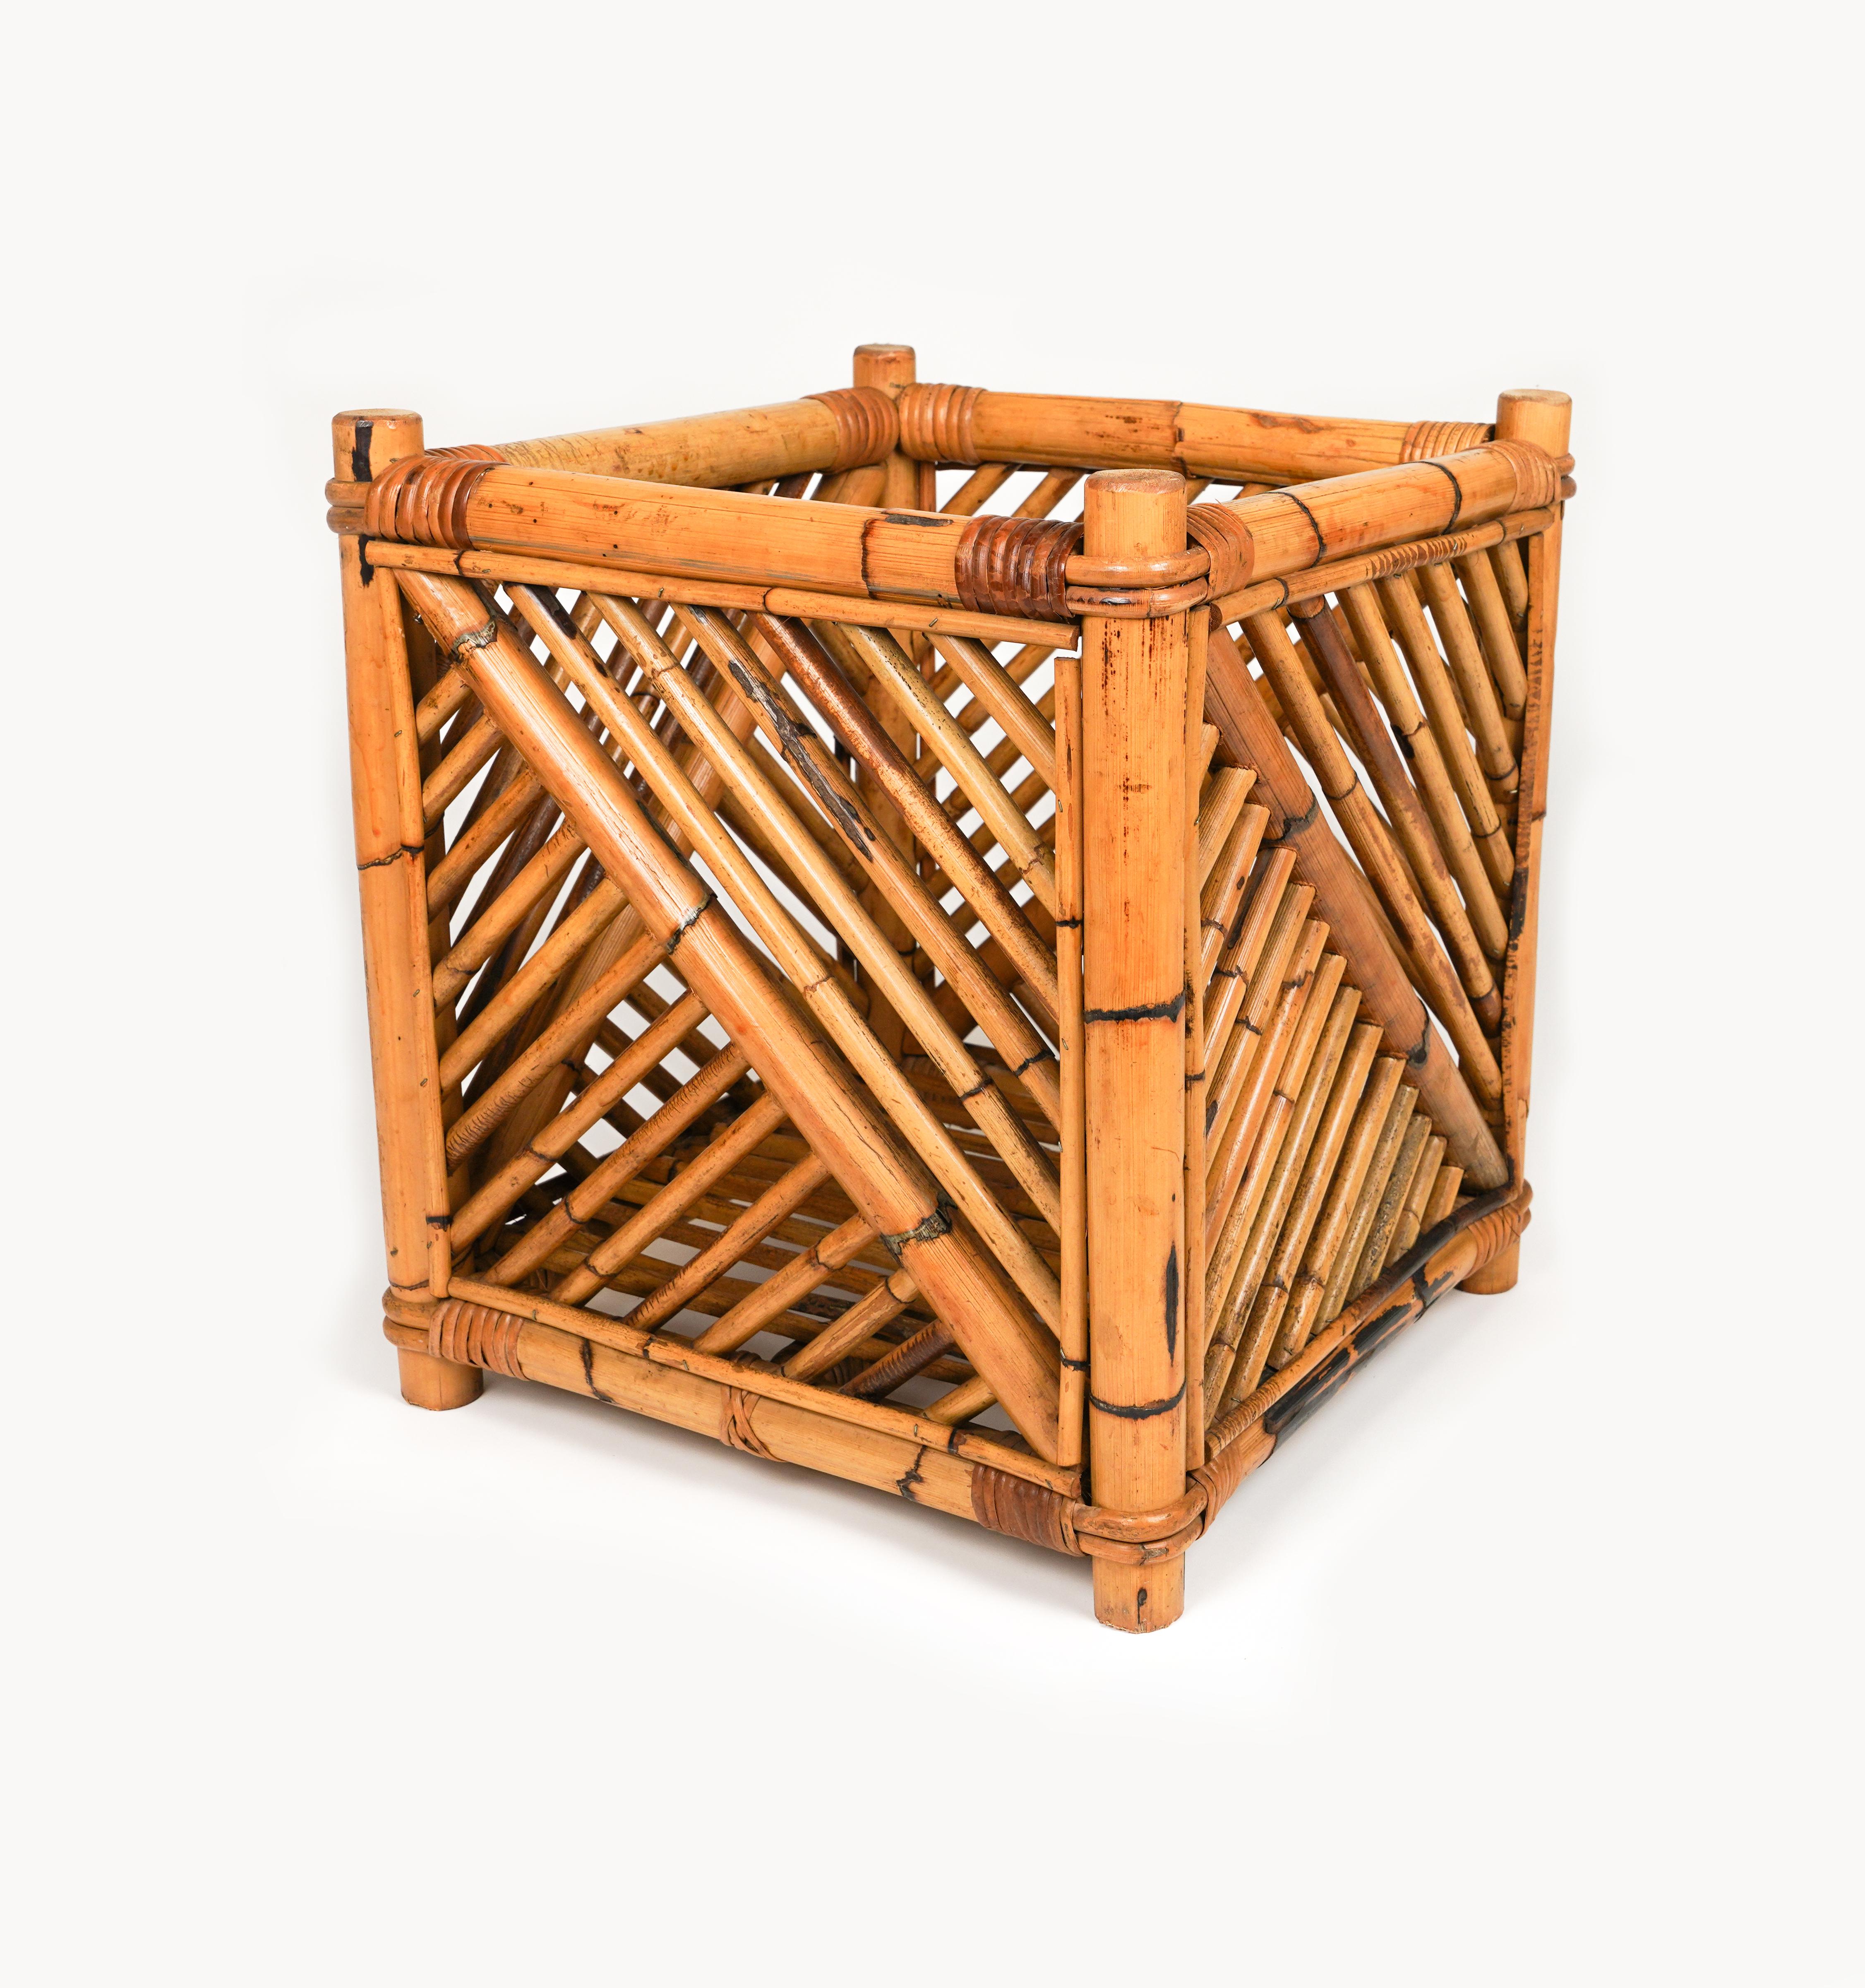 Late 20th Century Rattan and Bamboo Plant Holder or Basket by Vivai Del Sud, Italy 1970s For Sale